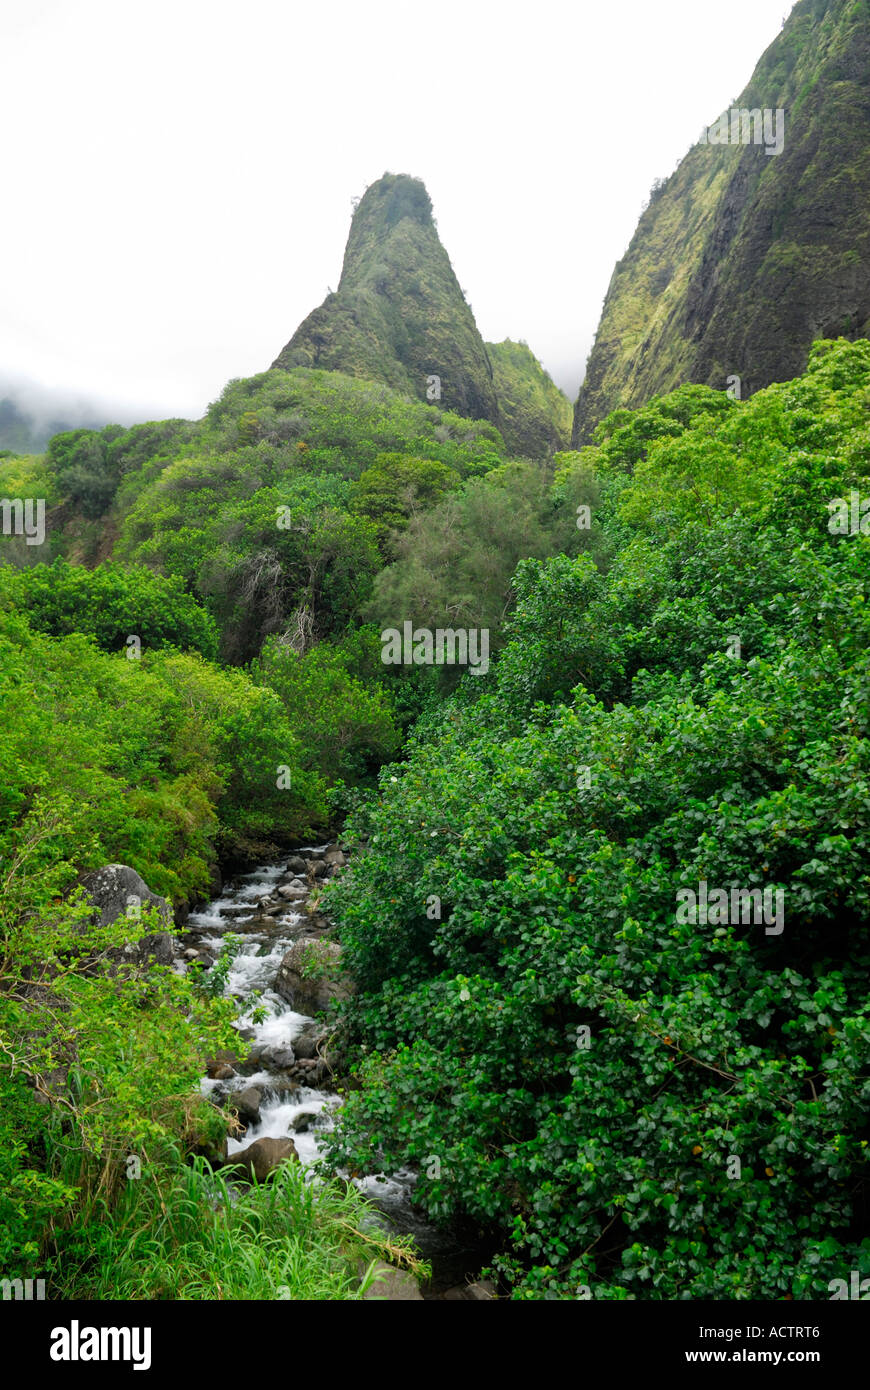 The Needle and stream at Iao Valley State Park Maui Island Hawaii Stock Photo